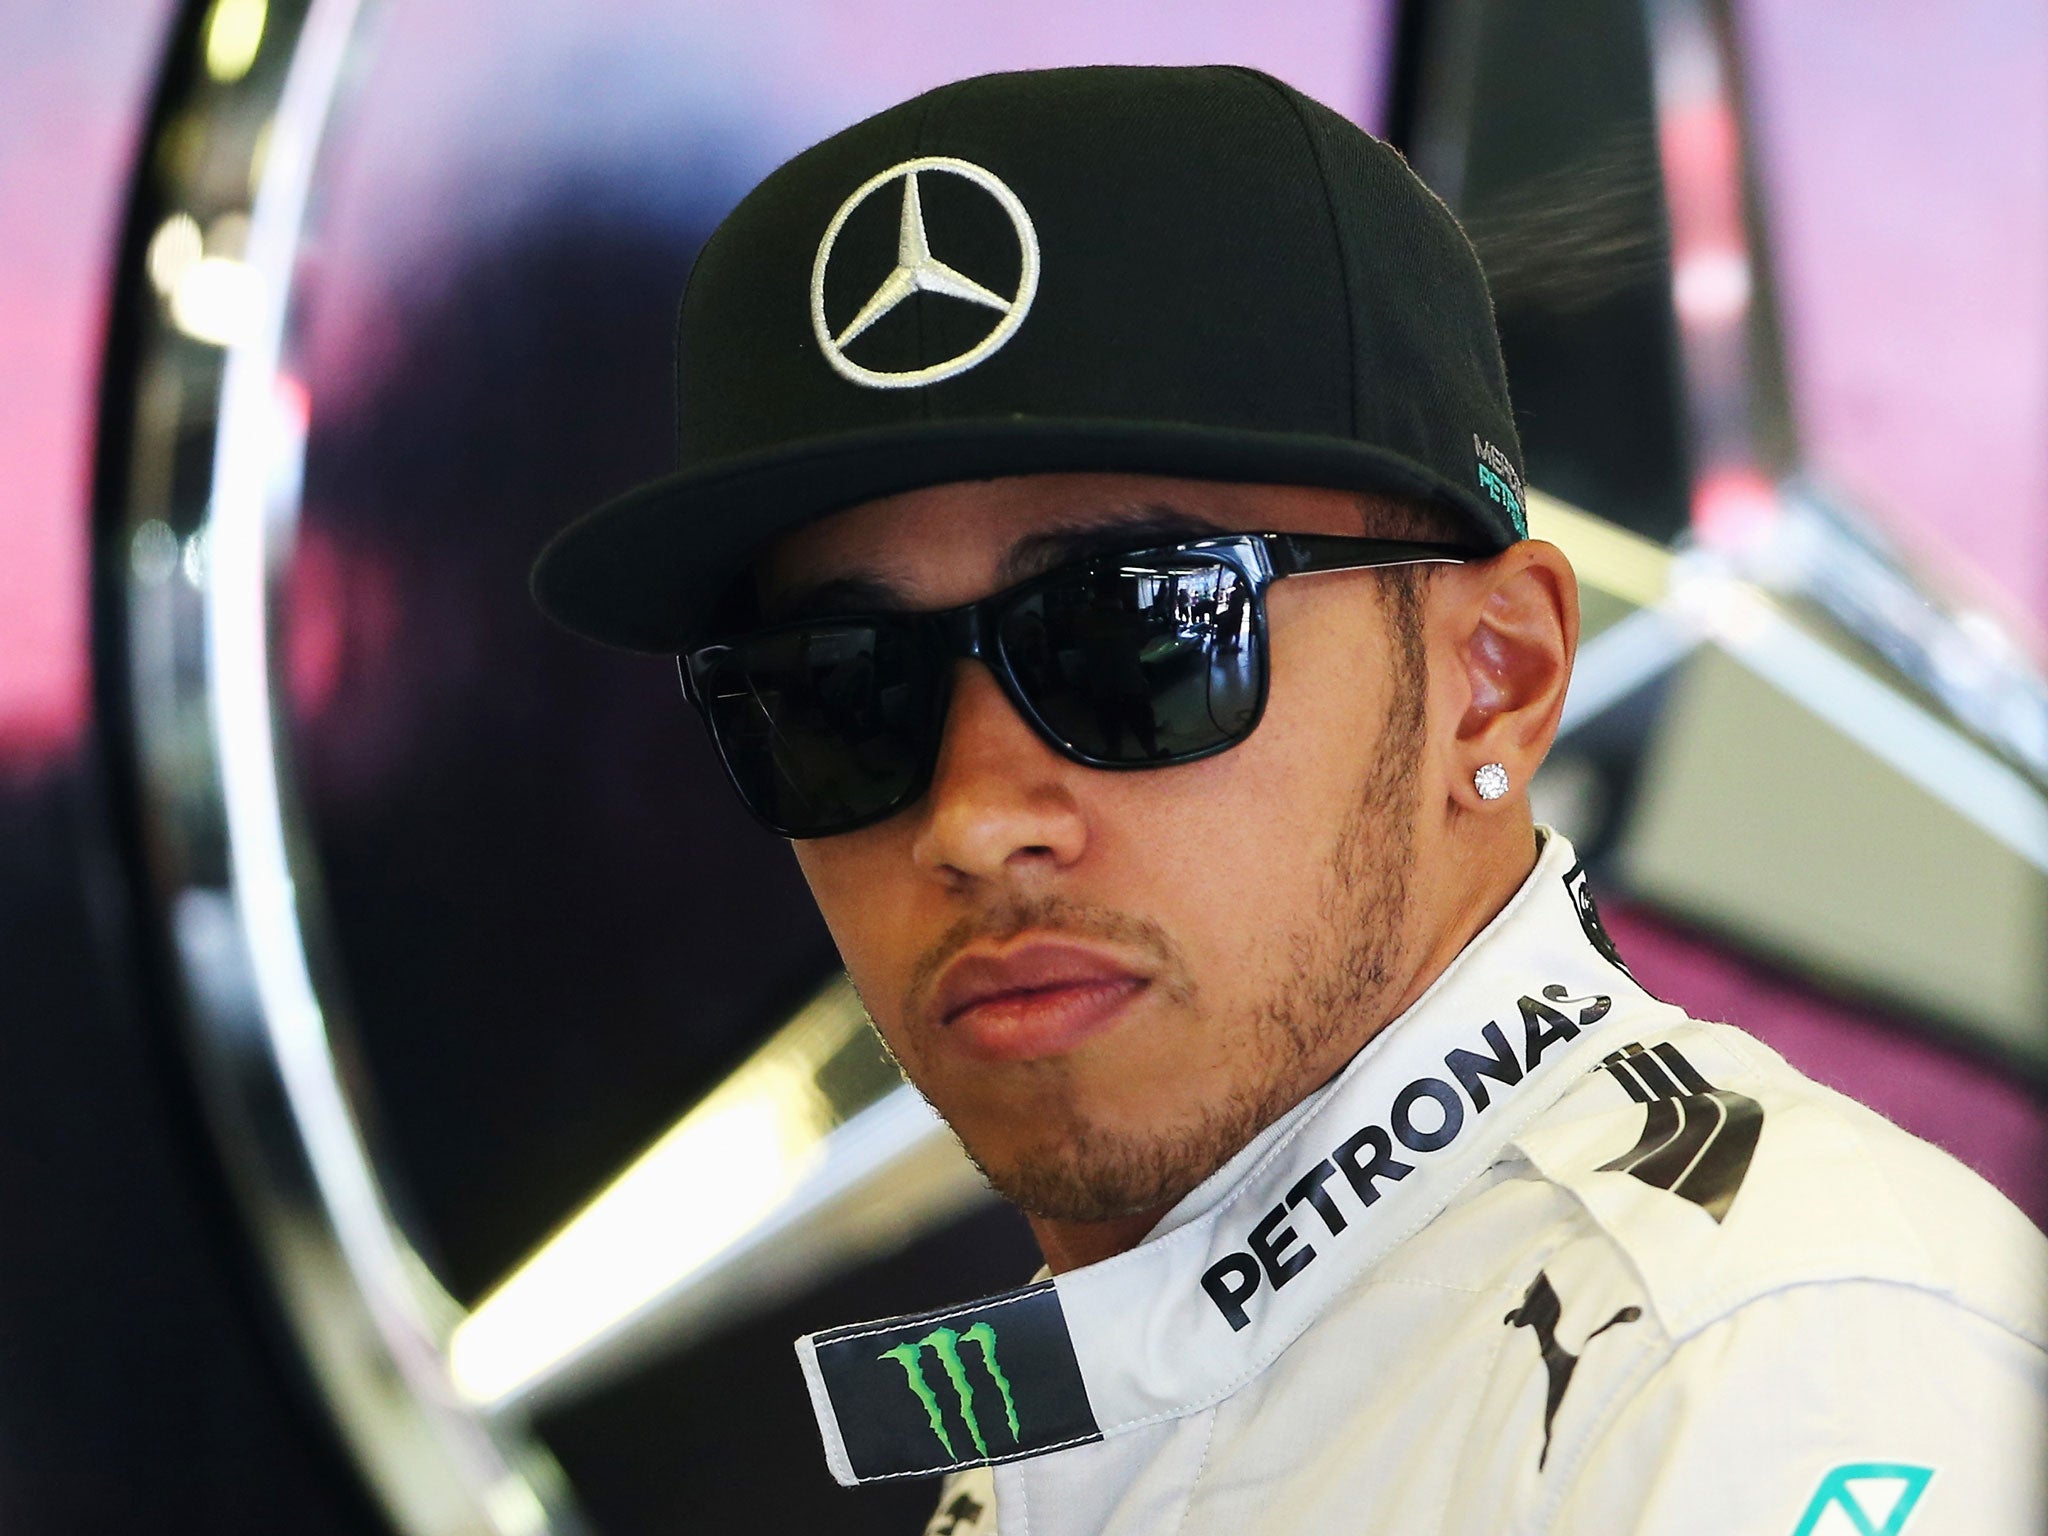 Lewis Hamilton of Great Britain and Mercedes GP prepares to drive during practice for the Australian Formula One Grand Prix